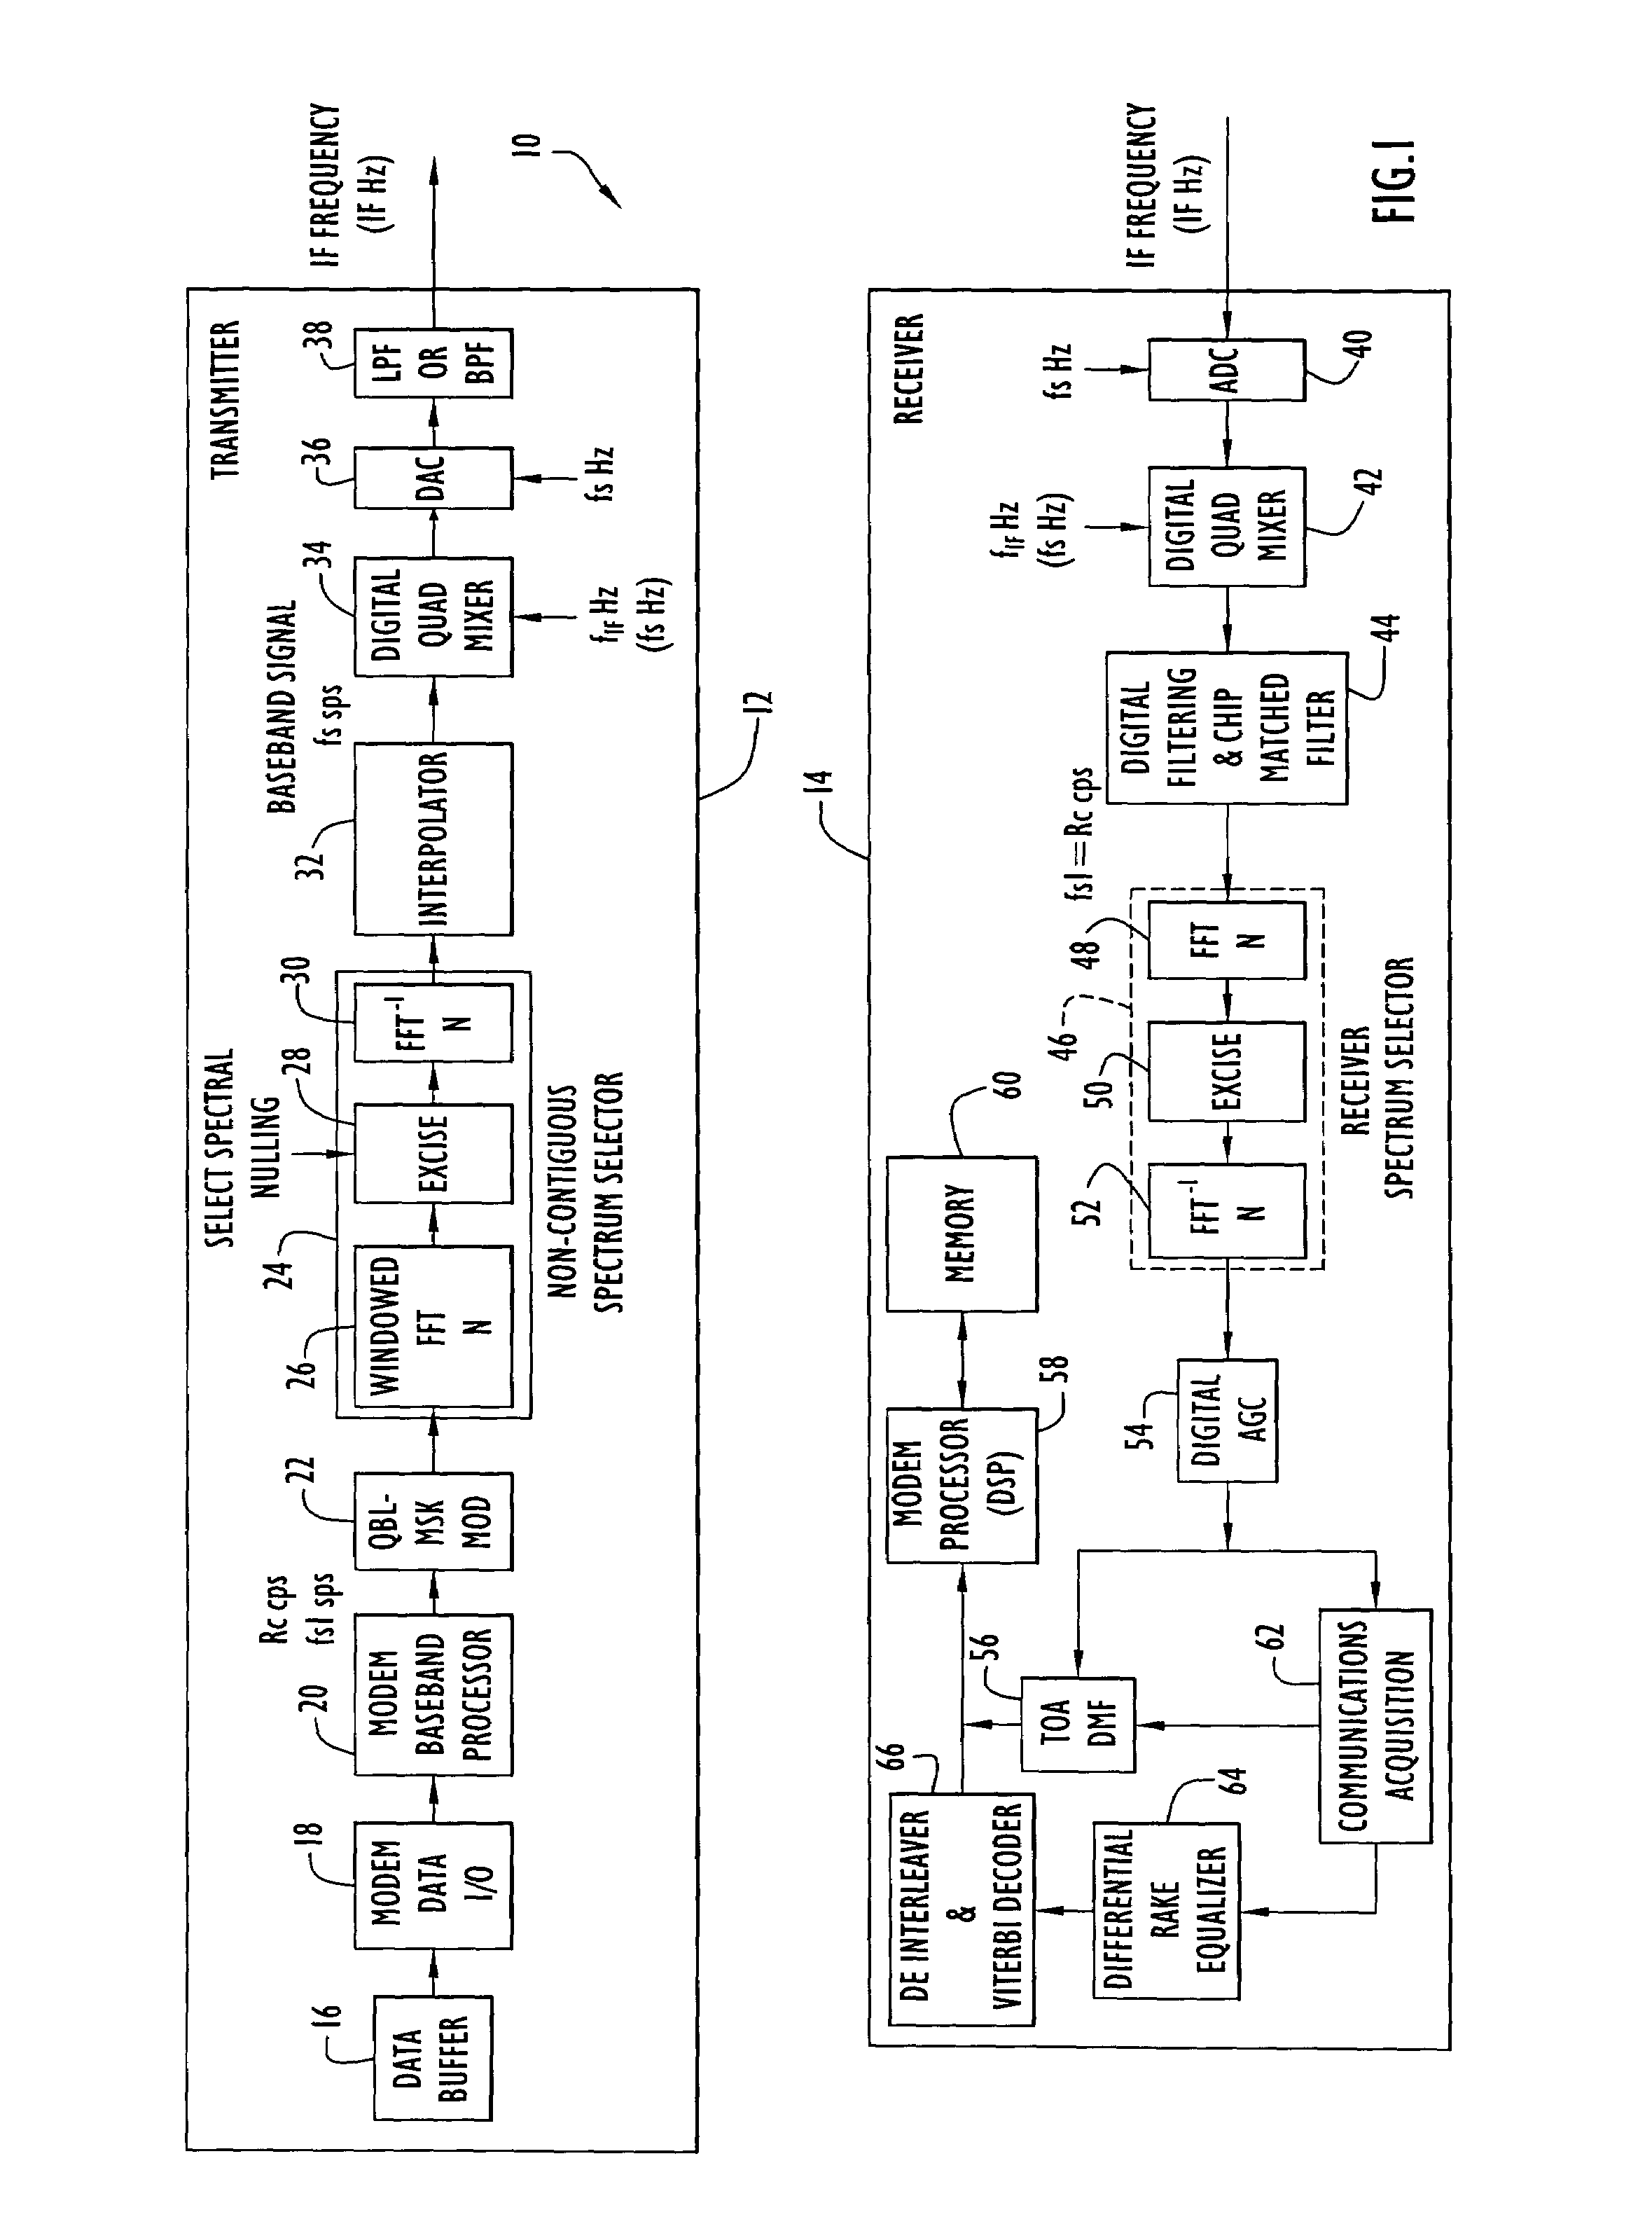 Methods and apparatus for transmitting non-contiguous spread spectrum signals for communications and navigation